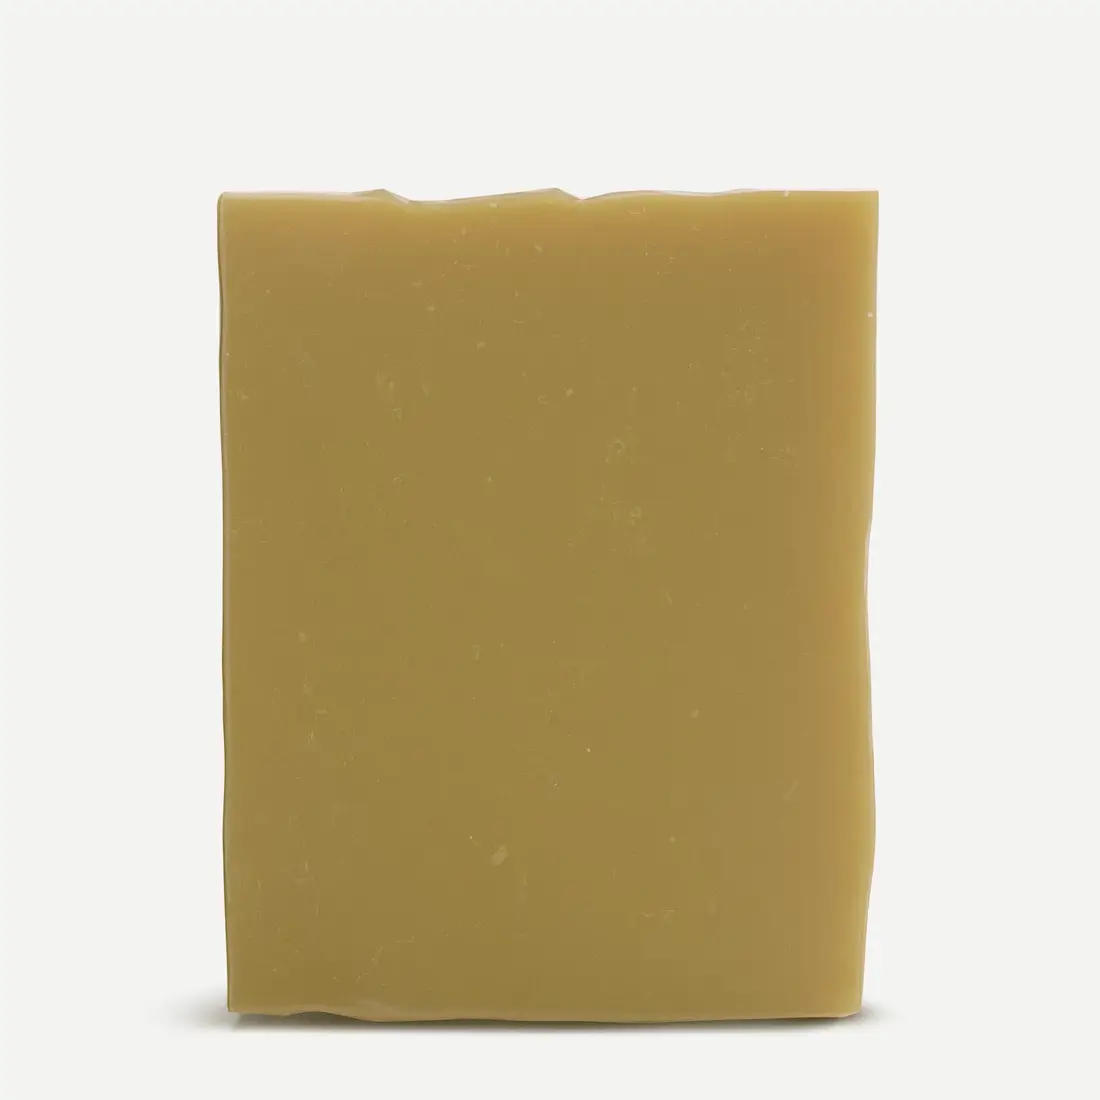 Typology Paris review cleansing bar with nettle